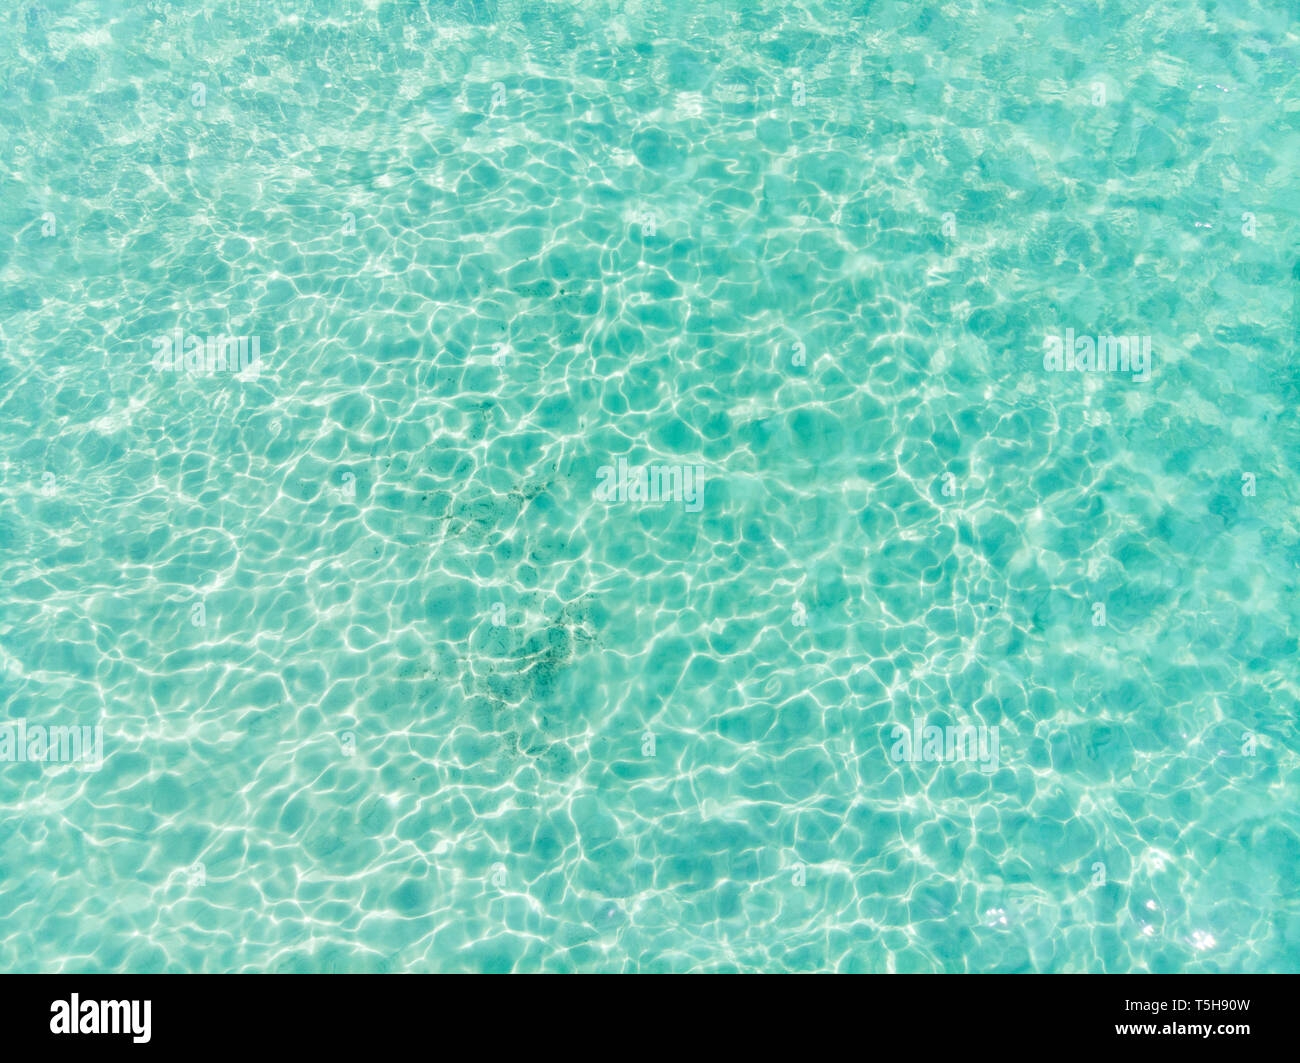 Tropical Blue Water in Australia Stock Photo